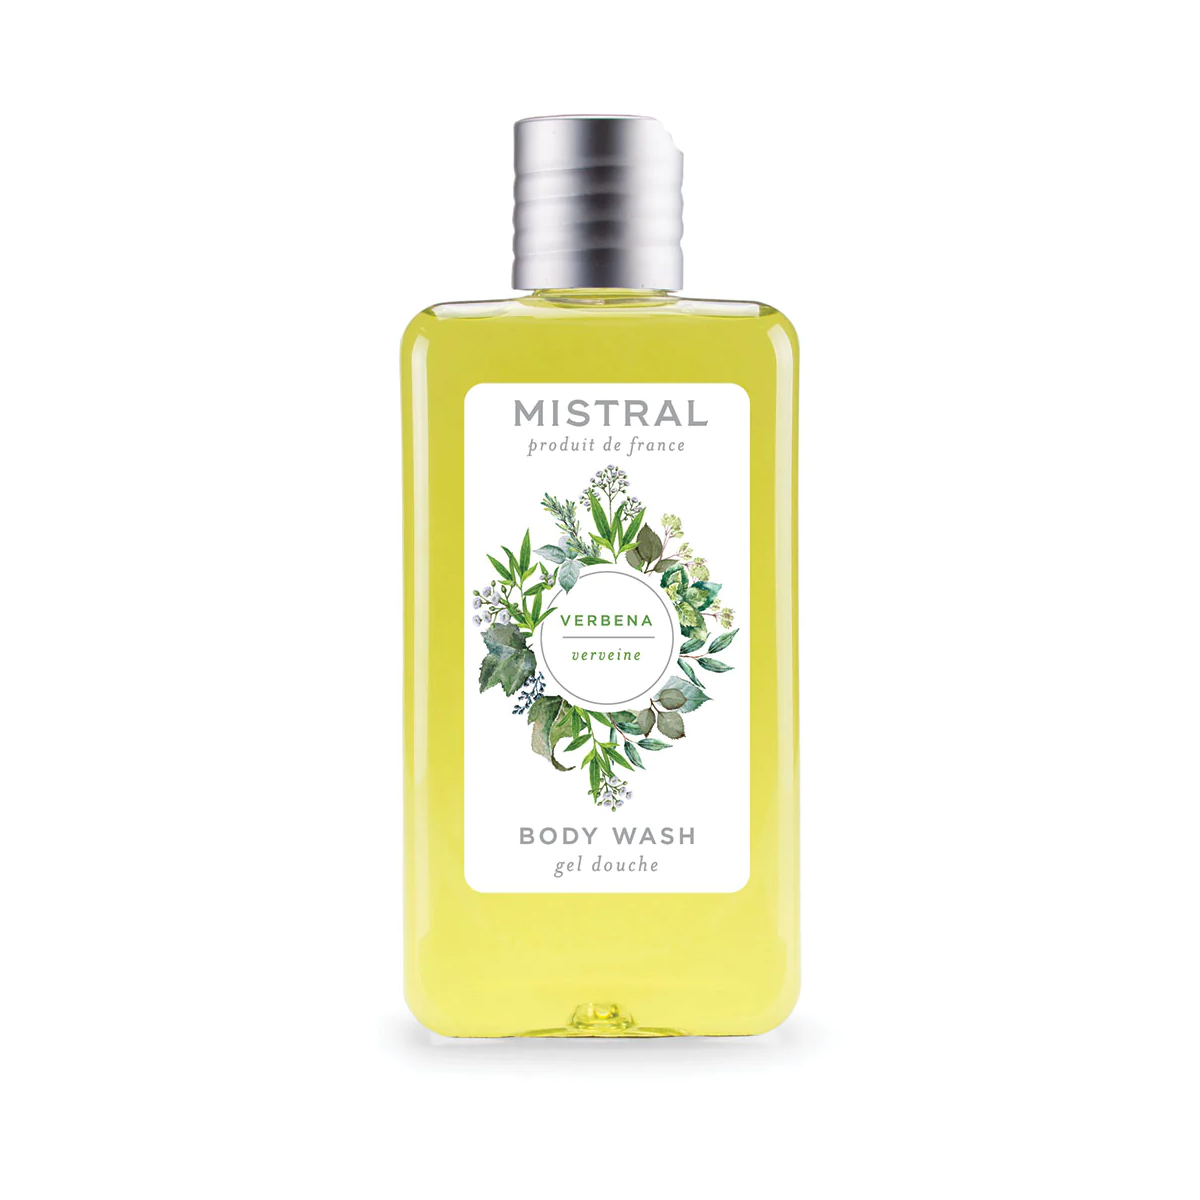 VERBENA CLASSIC BODY WASH by MISTRAL